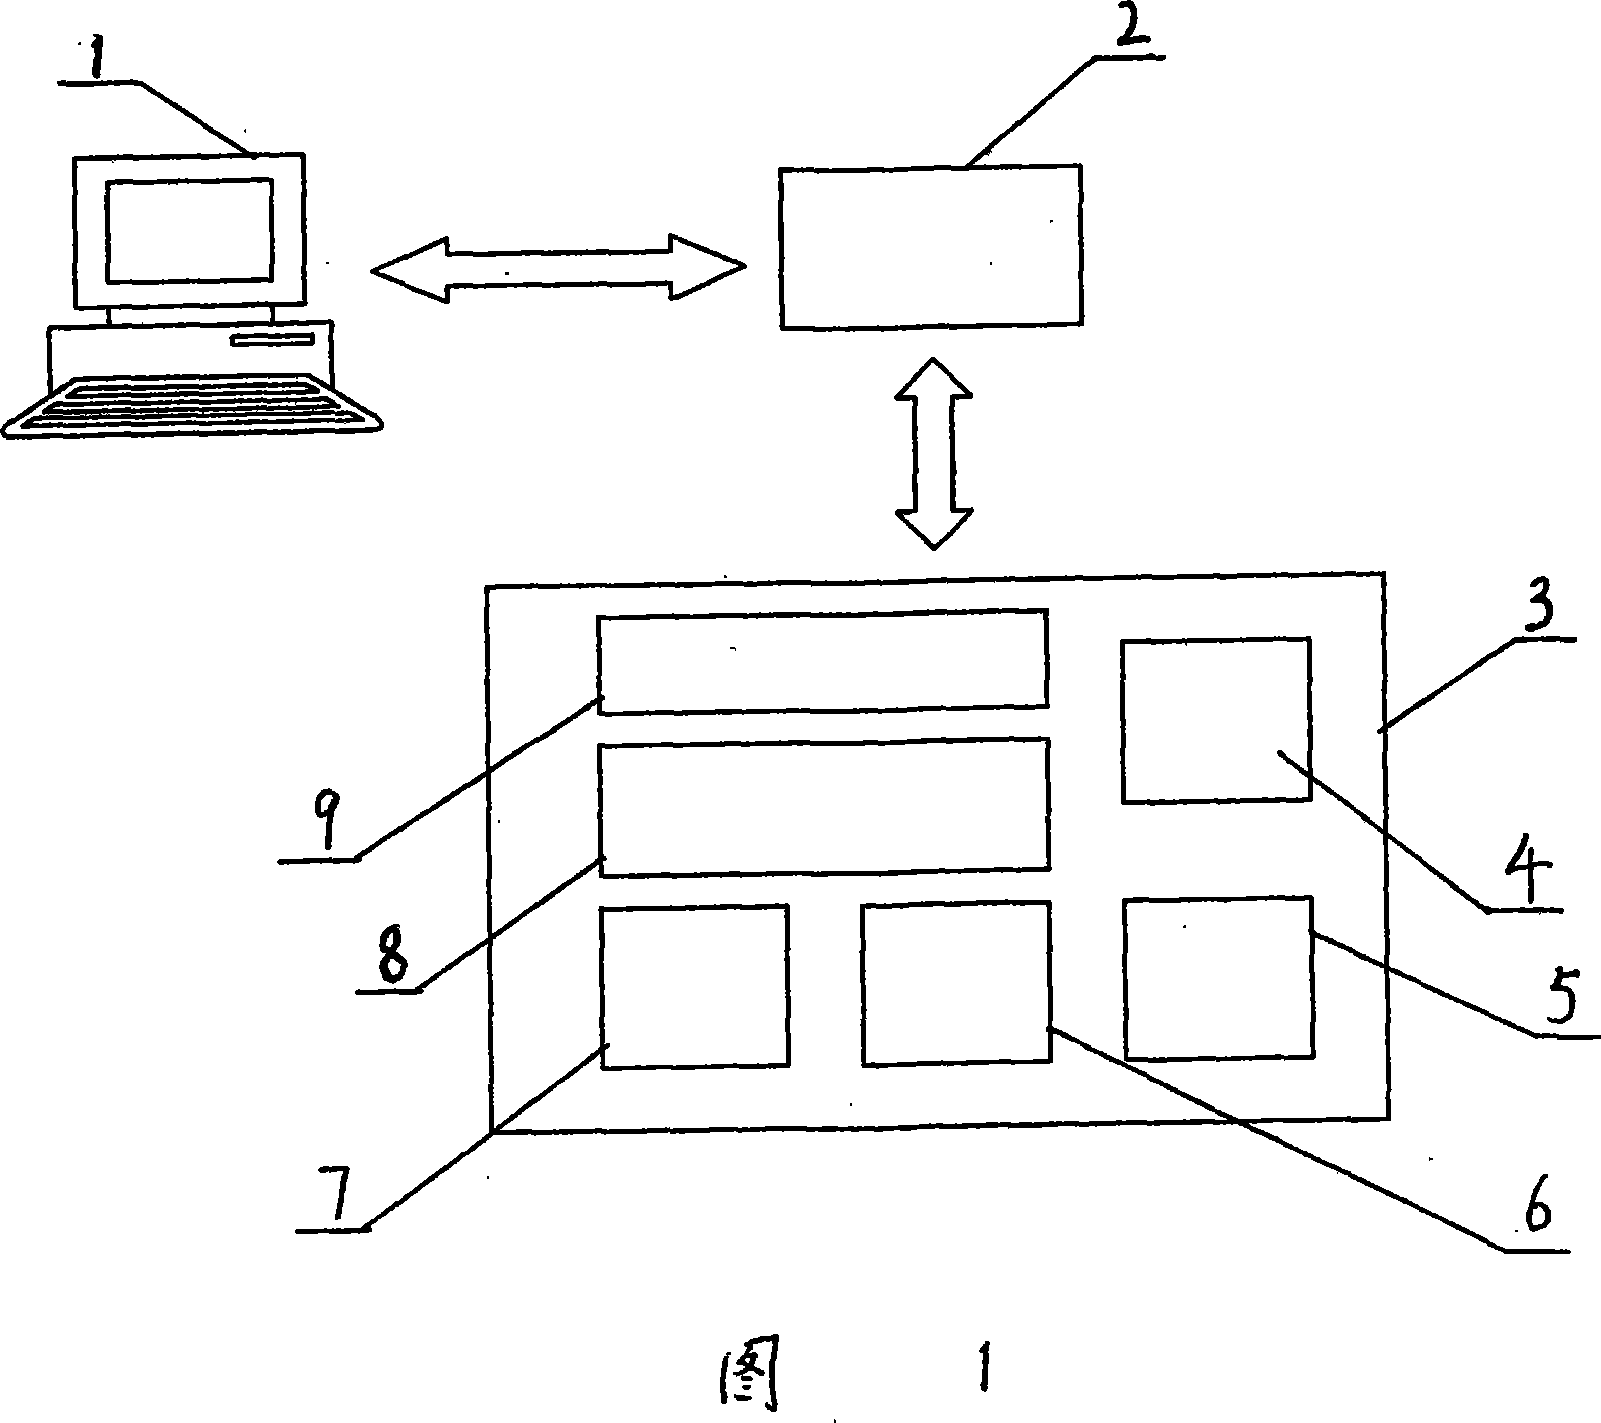 Testing method based on remote control vehicular device